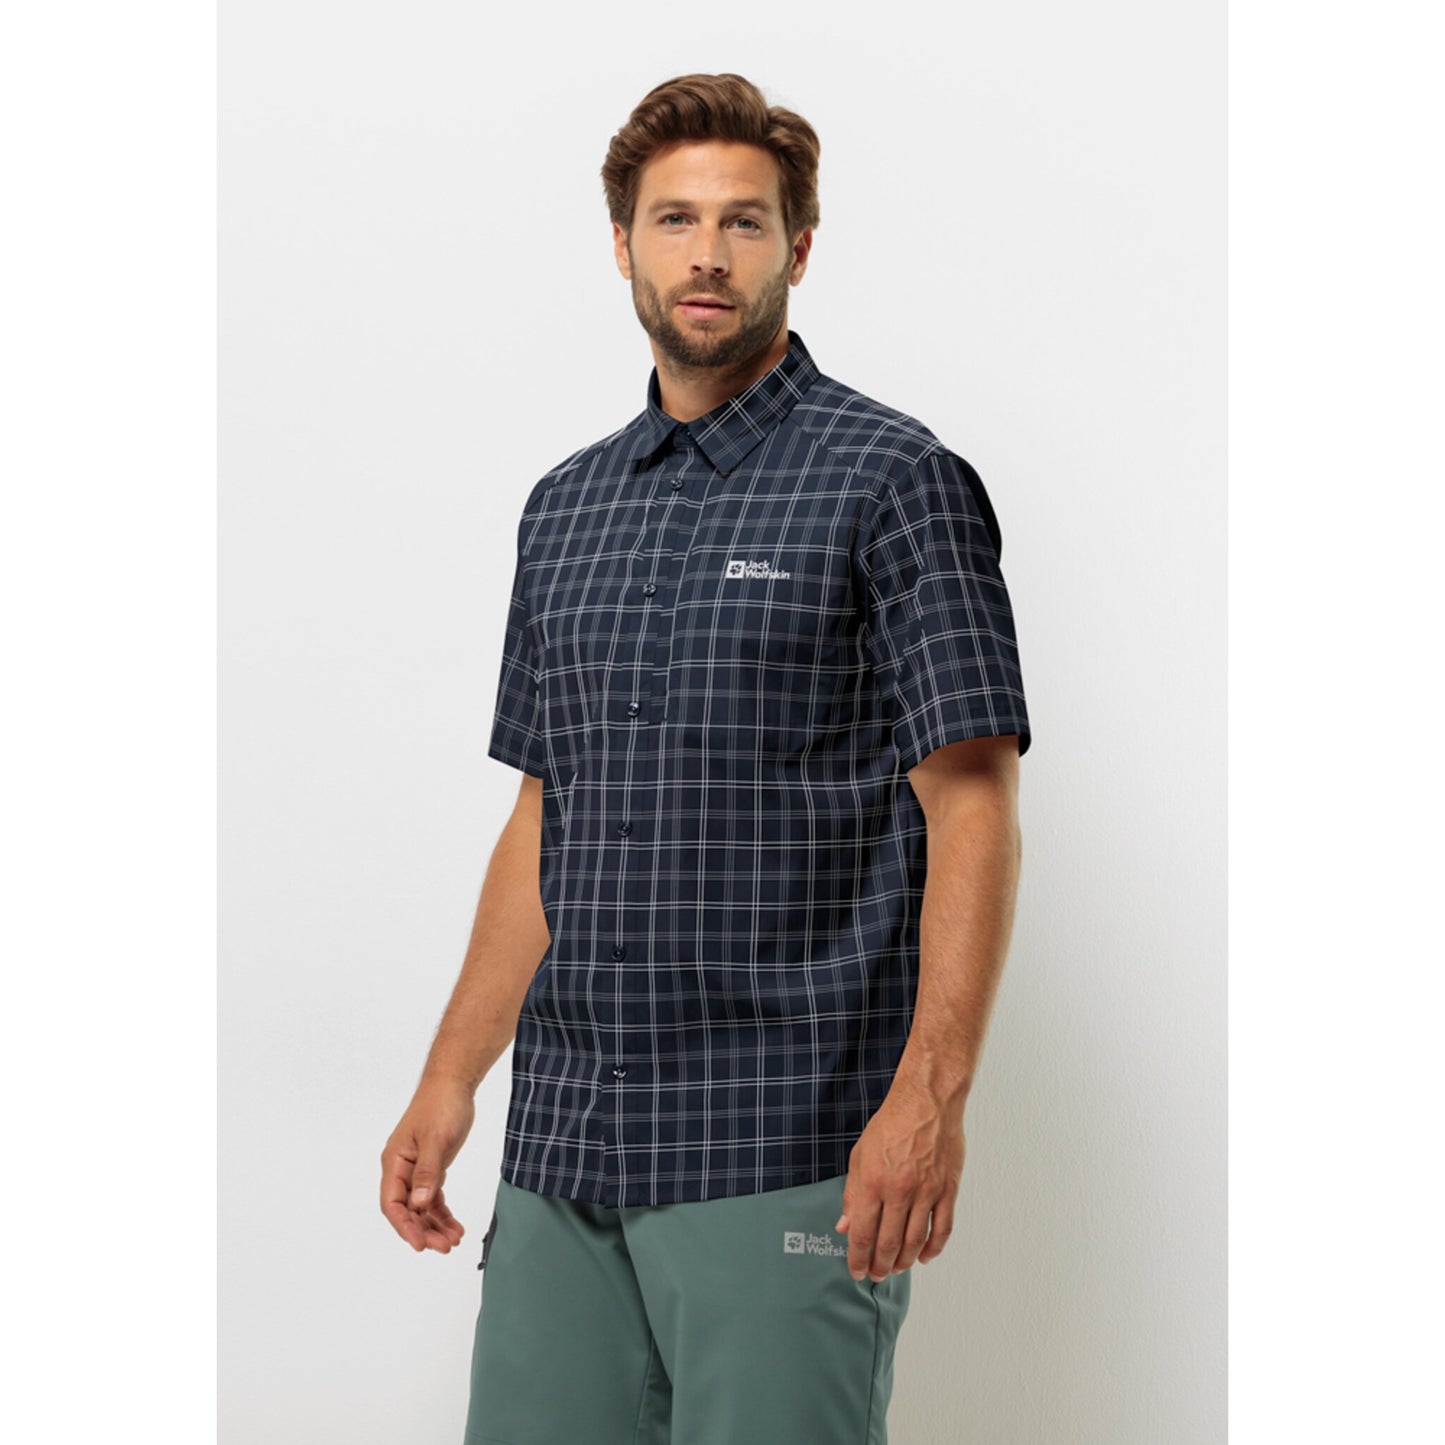 JACK WOLFSKIN-H-CHEMISE NORBO MANCHES COURTES